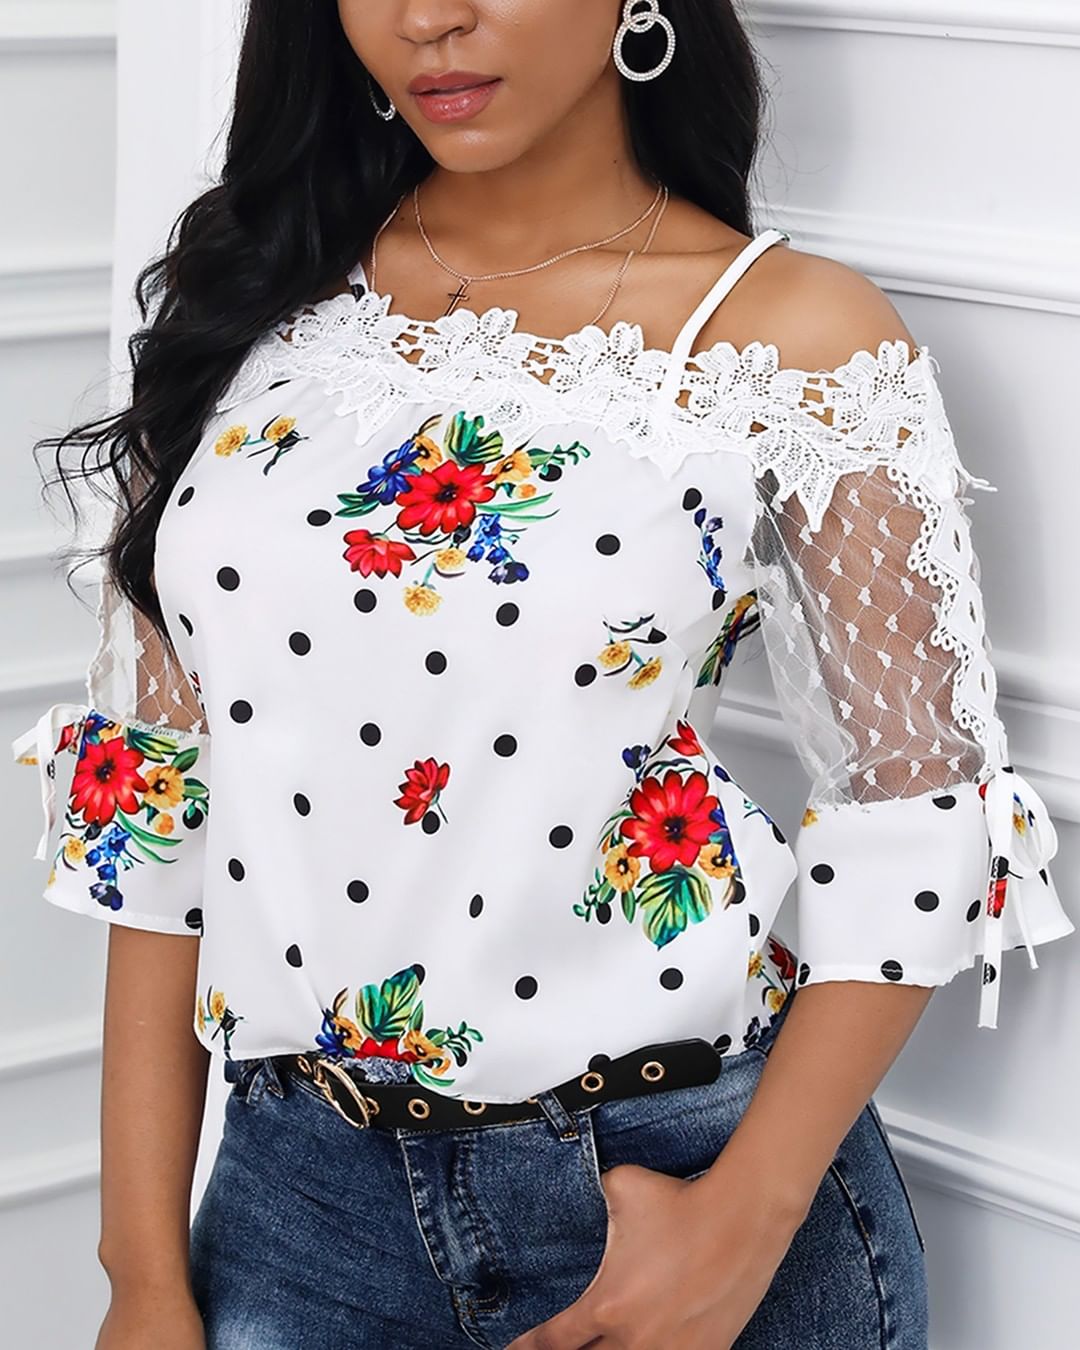 boutiquefeel_official - Cold Shoulder Mesh Insert Print Blouse⁠
Click https://www.boutiquefeel.com to ⁠
search LZJ0306 get more details.⁠
⁠
 #fashion #style #love